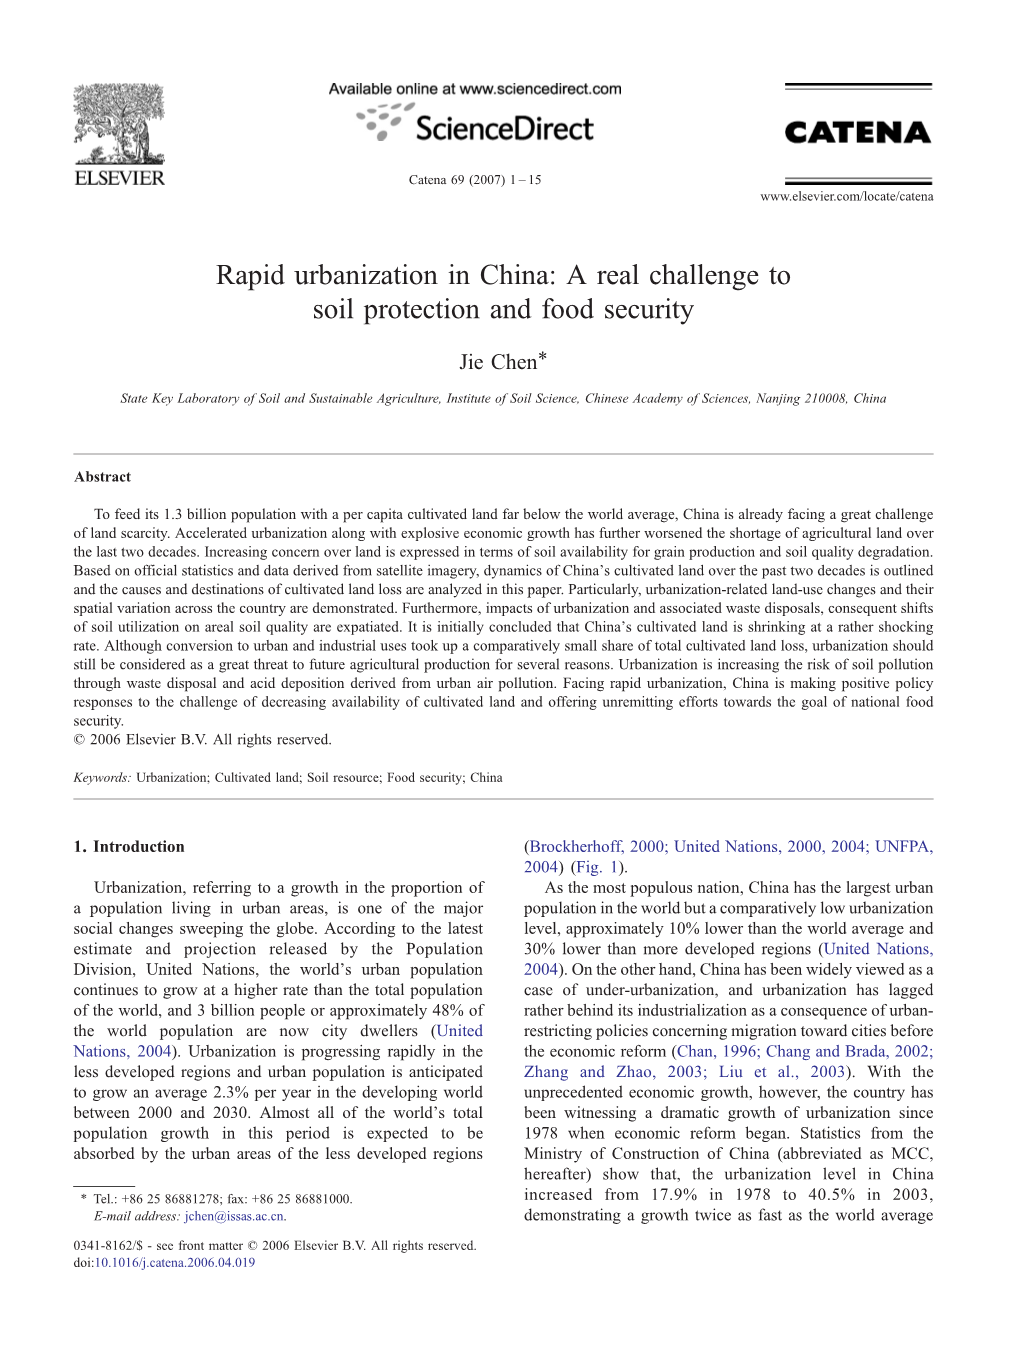 Rapid Urbanization in China: a Real Challenge to Soil Protection and Food Security ⁎ Jie Chen